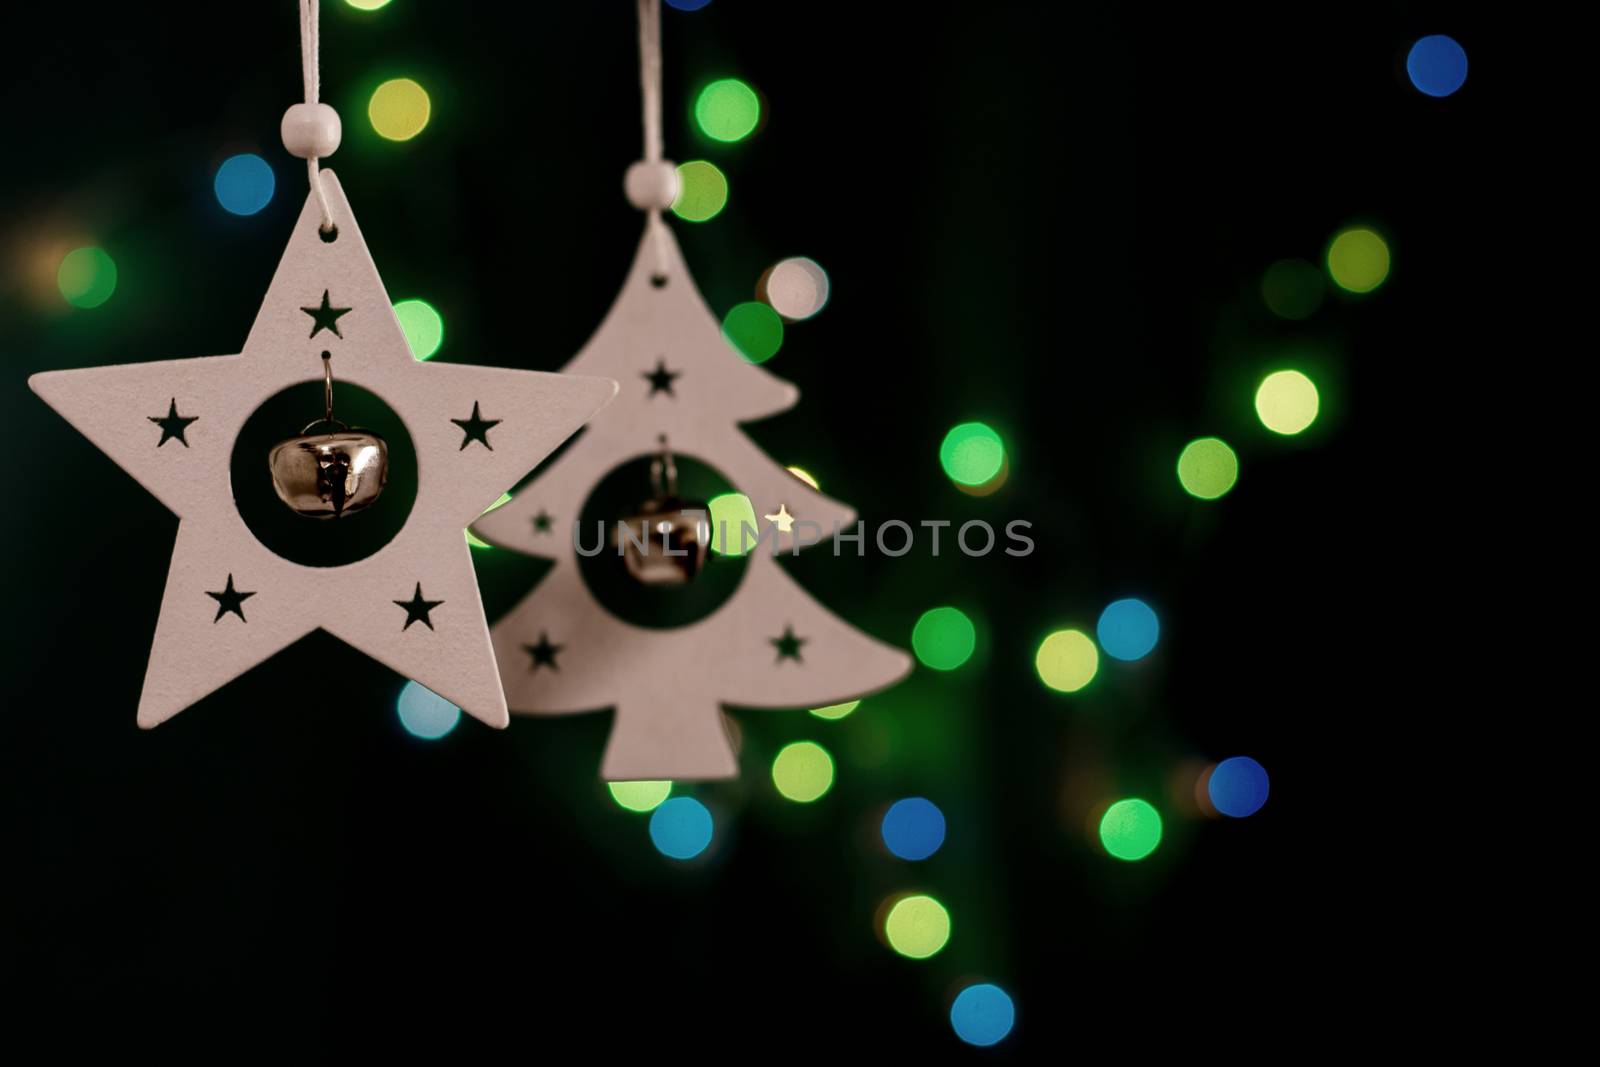 Handmade Christmas Decorations on Blurred Dark Background by clusterx